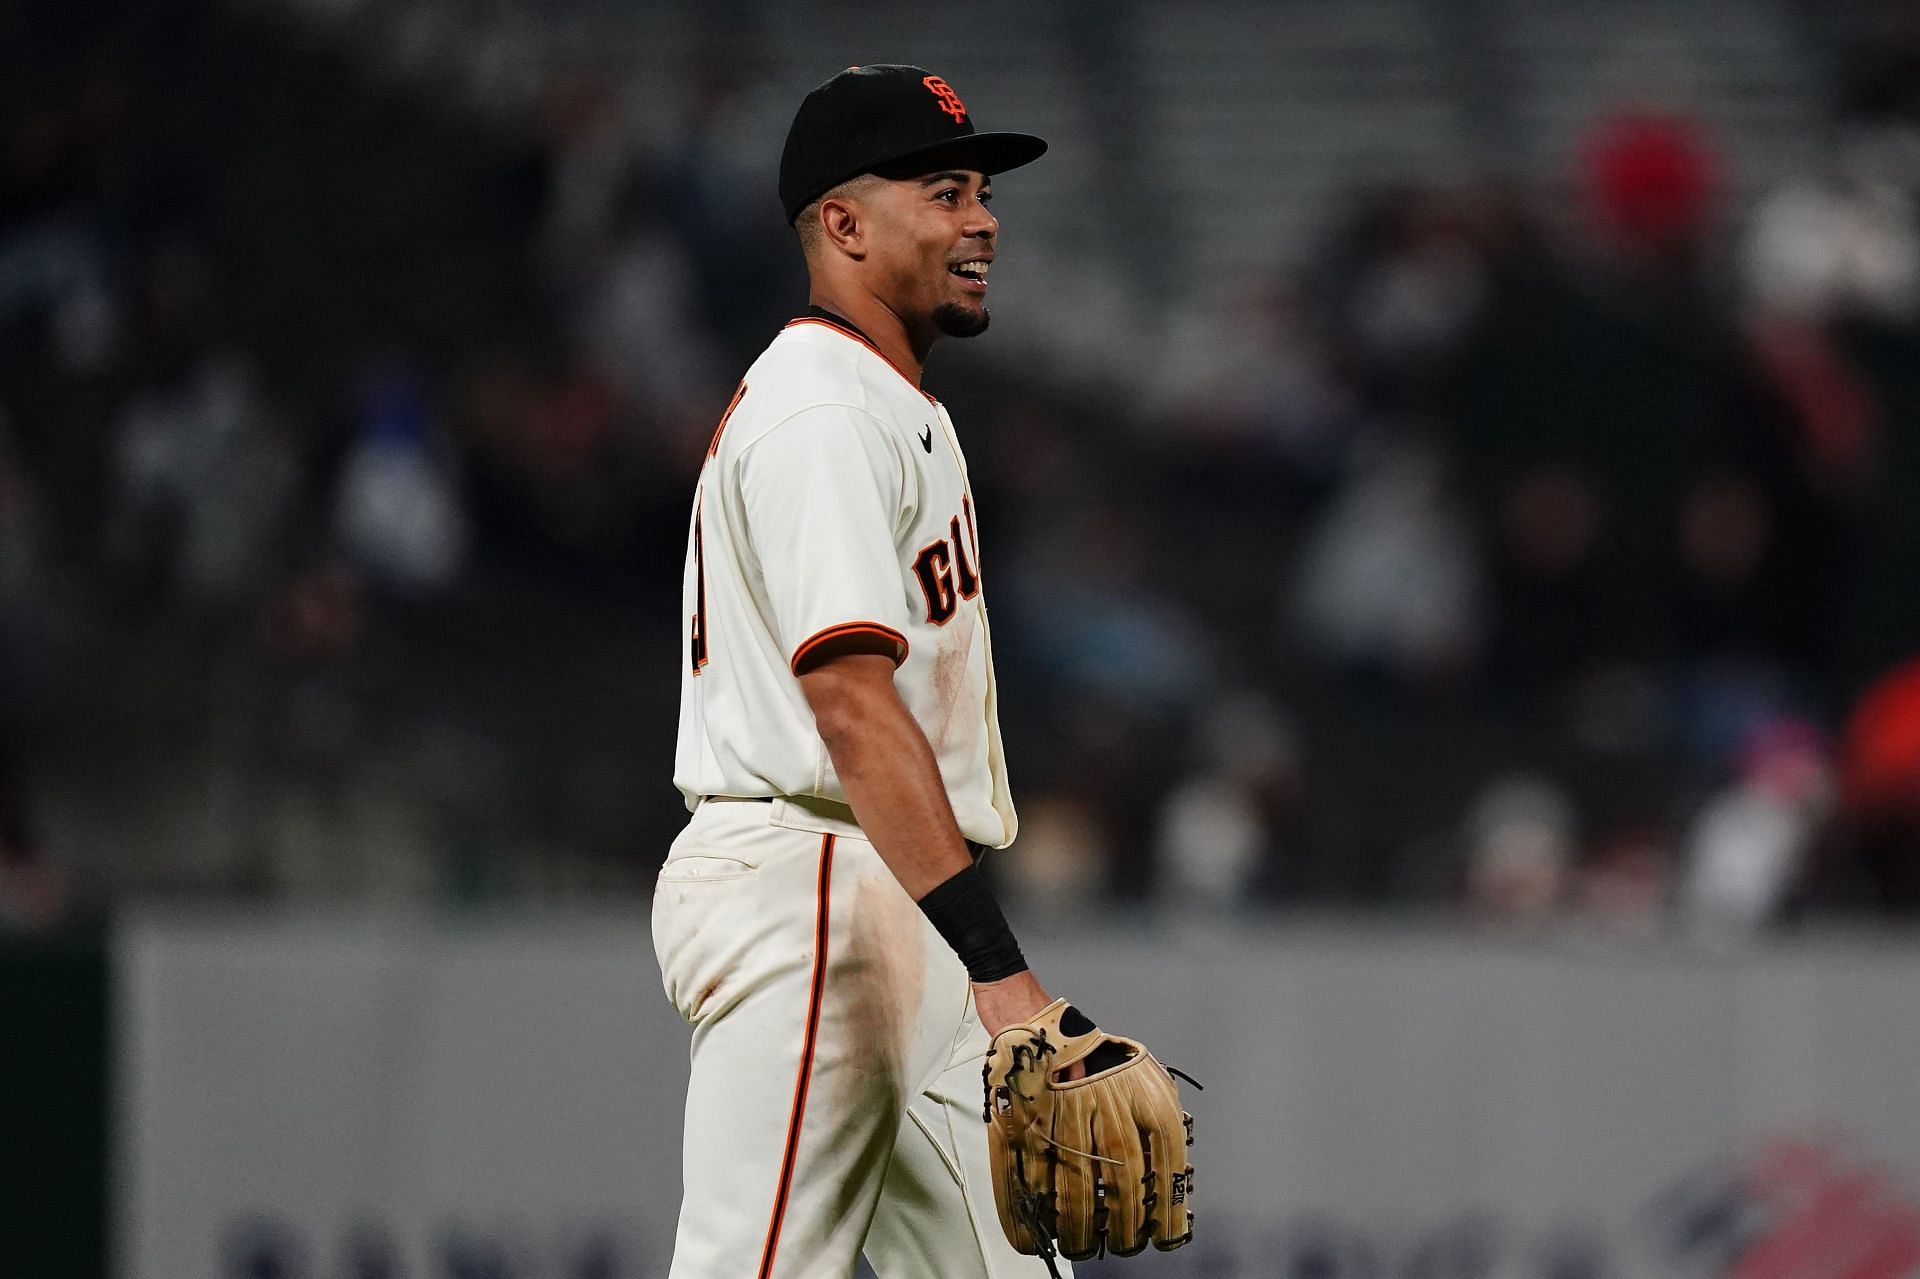 San Francisco Giants outfielder LaMonte Wade Jr. made an eye-catching play against the Chicago White Sox.